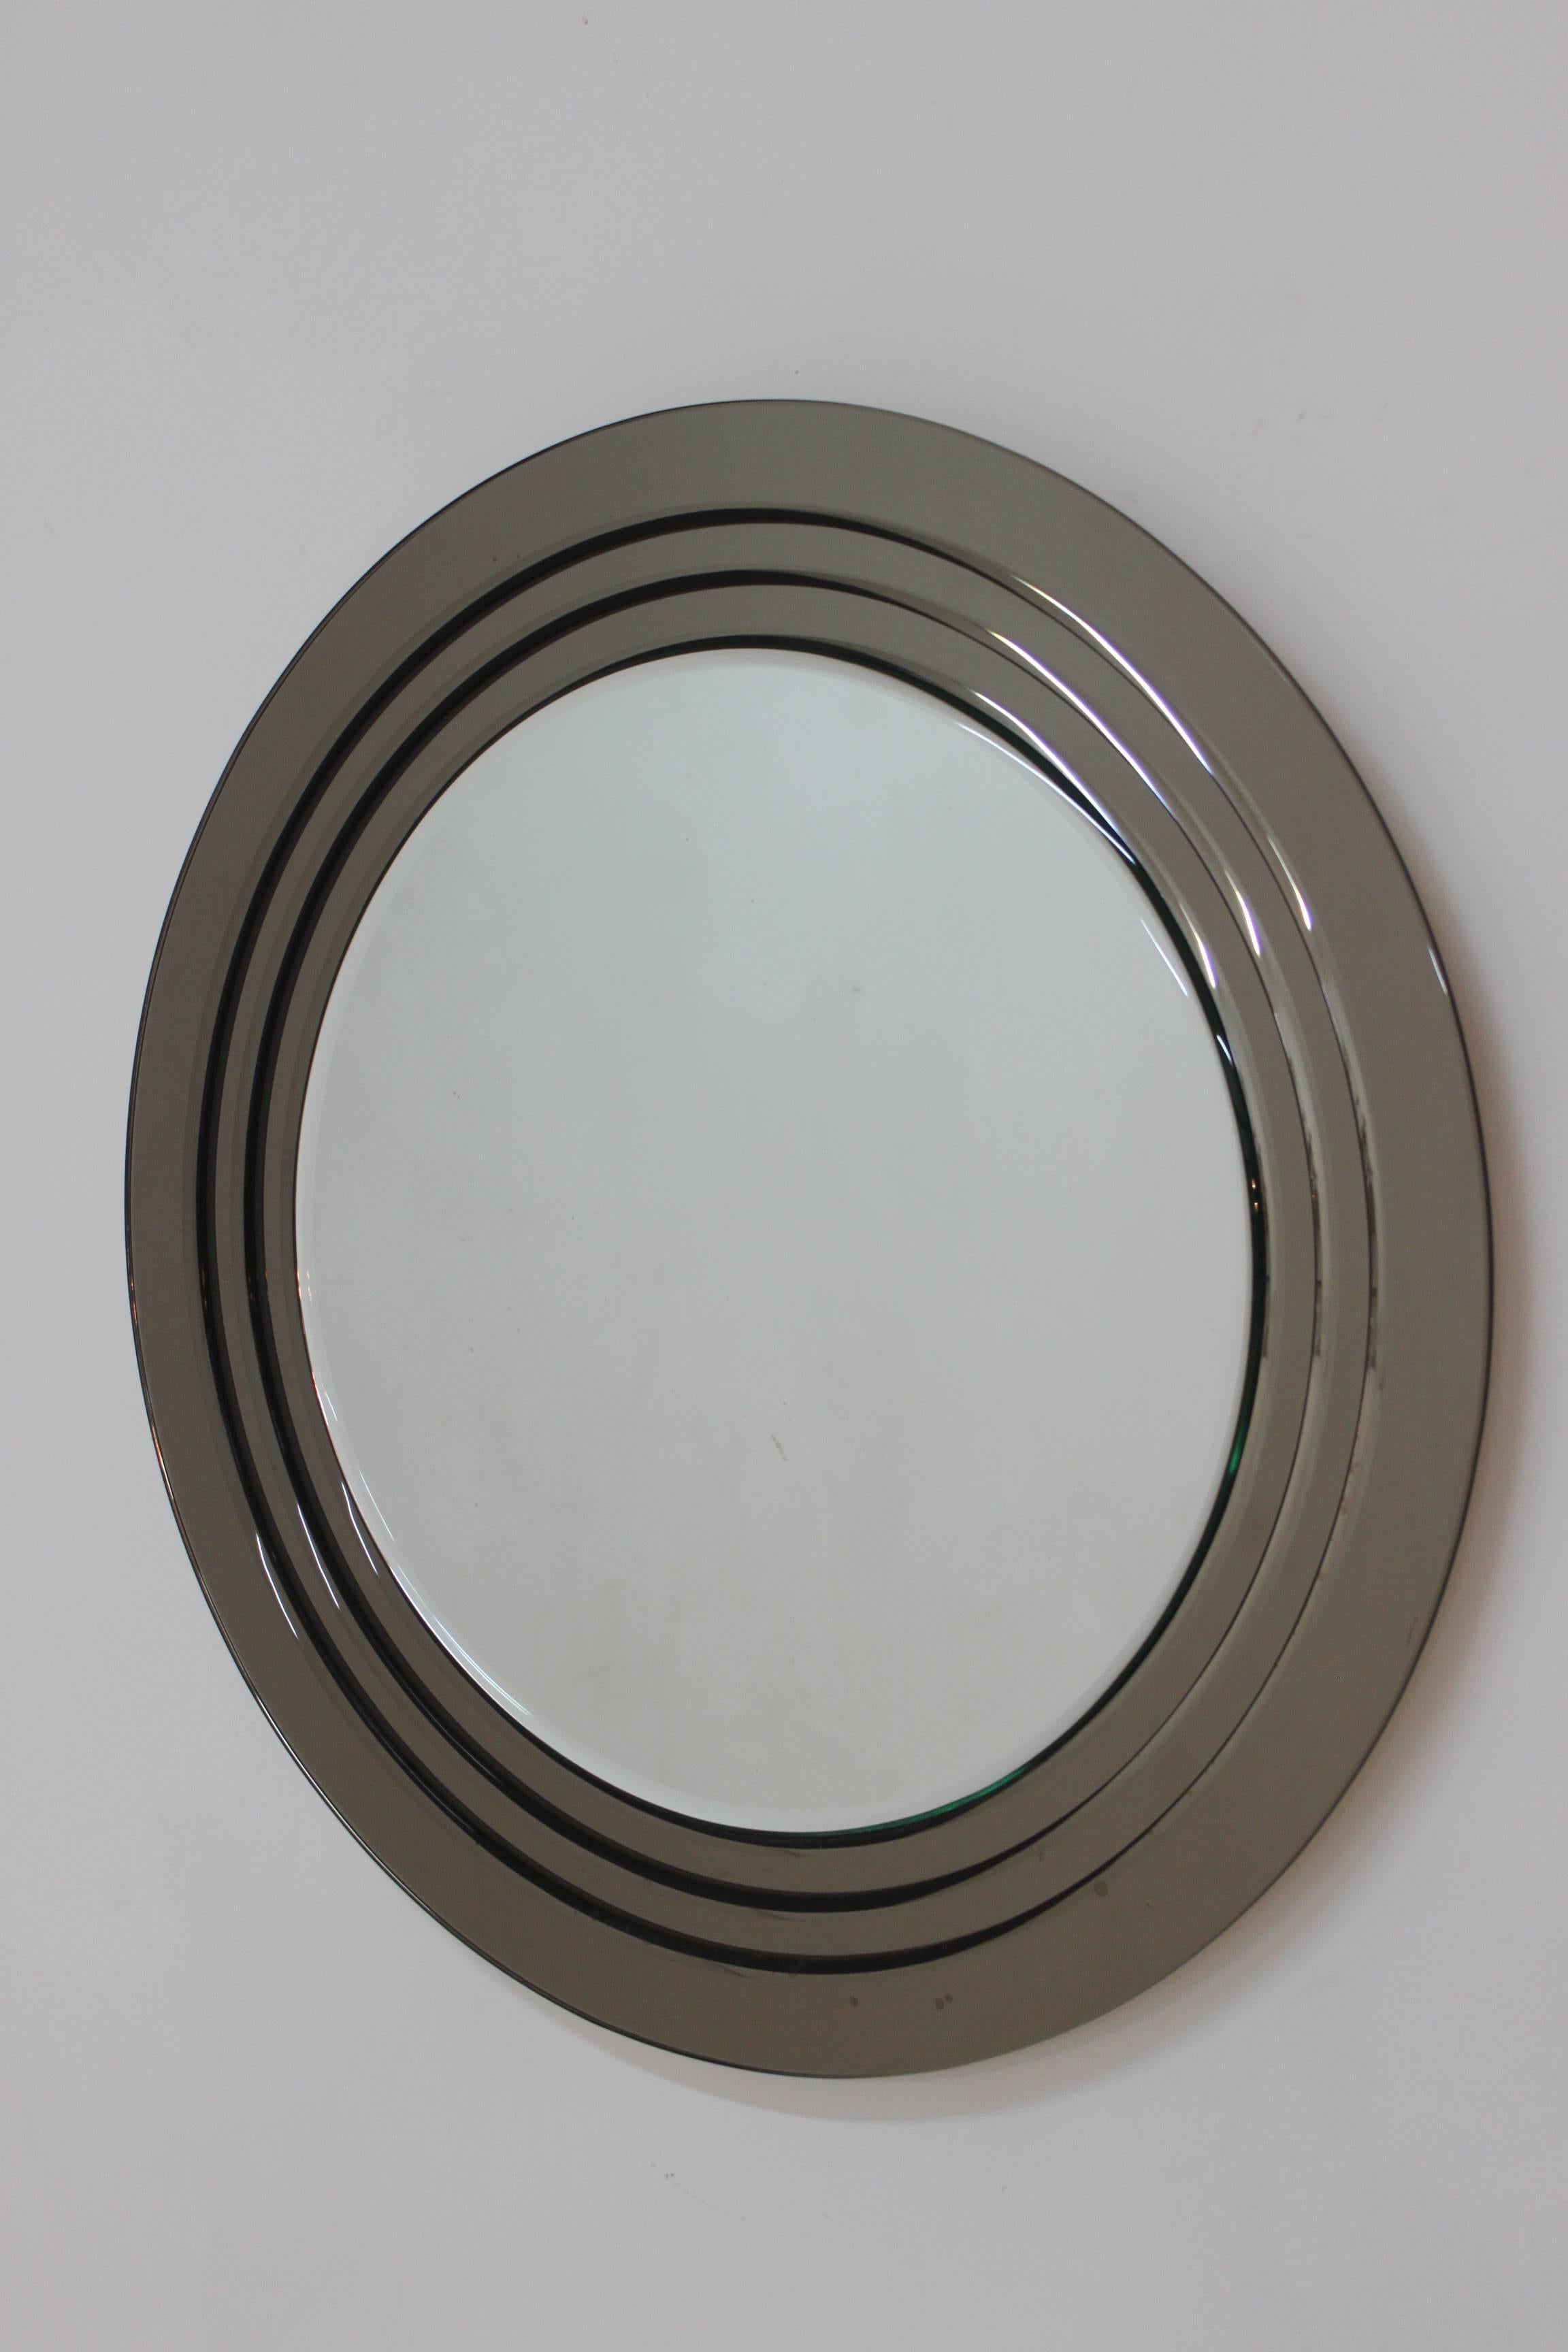 Beatiful round mirror made by crystal Art.
Glass details,  
circa 1960.